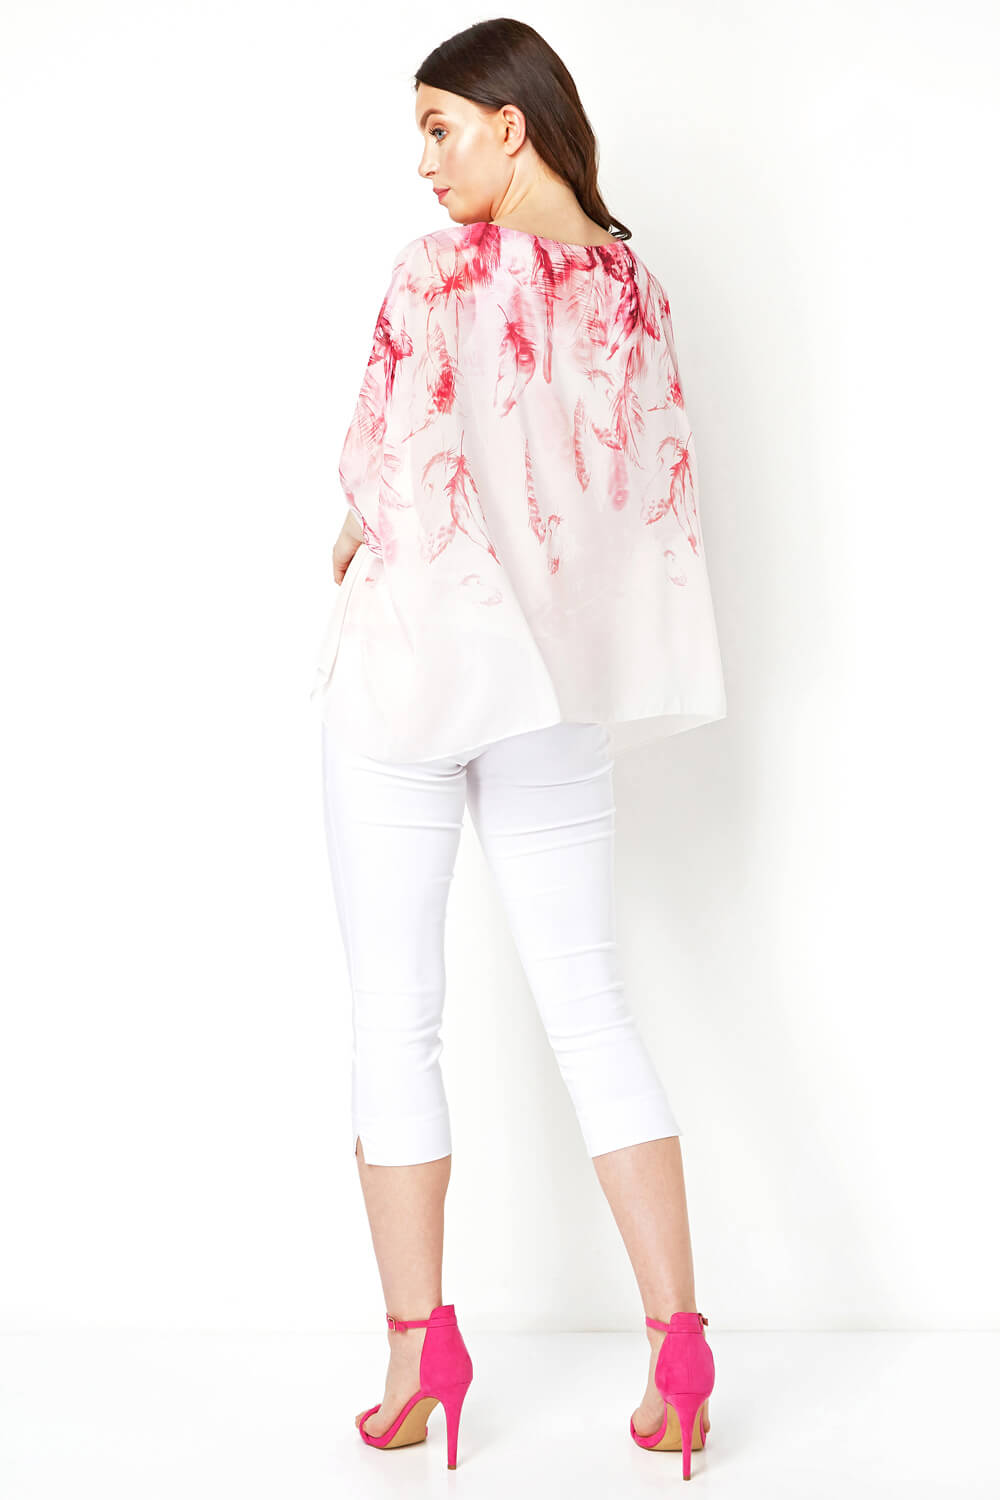 PINK Feather Border Print Overlay Top, Image 3 of 8